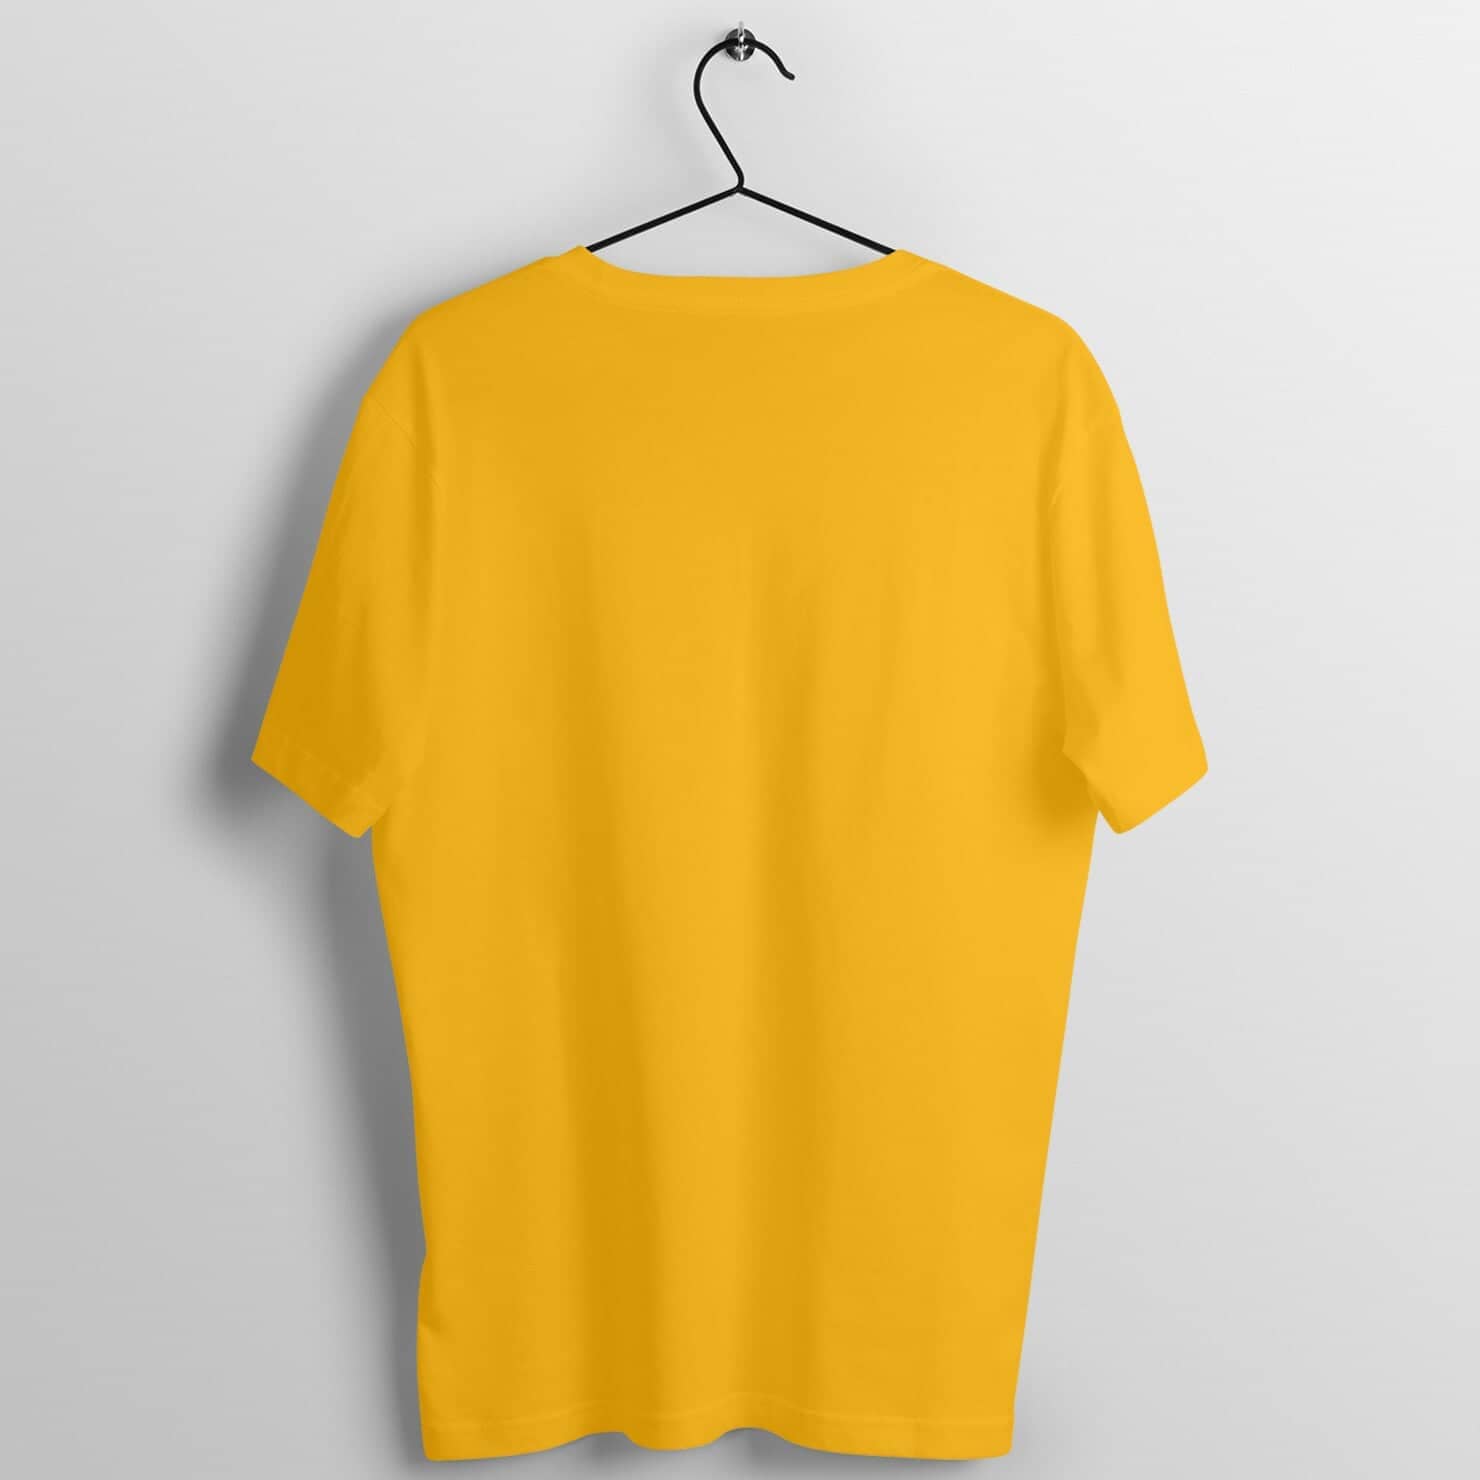 Nerd Glasses Emoji Special Golden Yellow T Shirt for Men and Women Printrove 